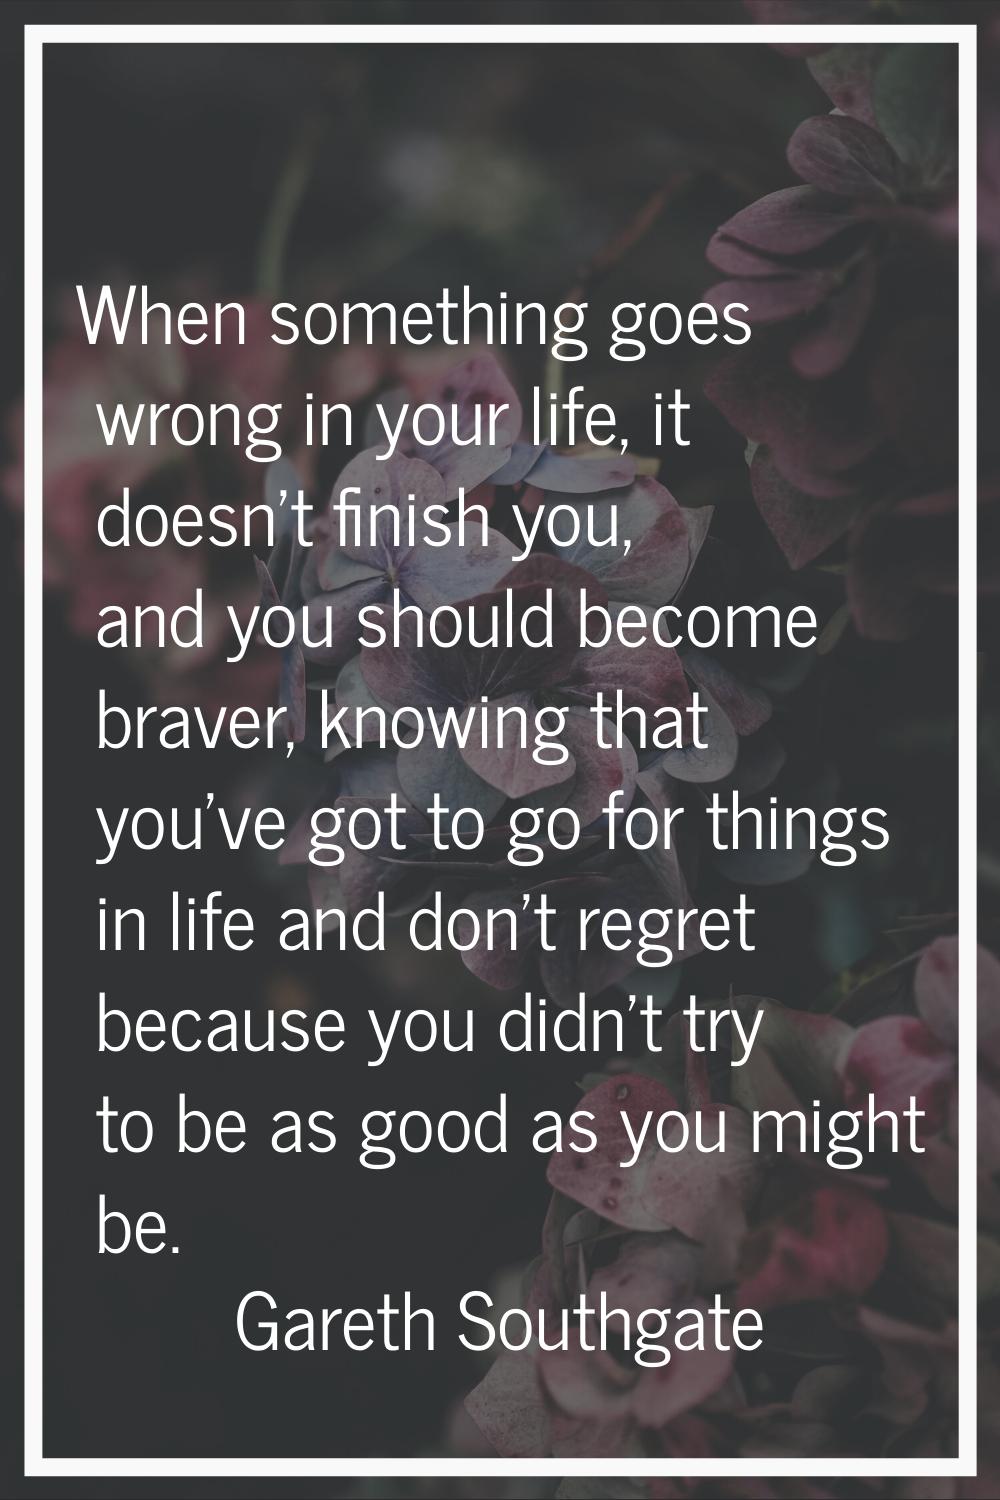 When something goes wrong in your life, it doesn't finish you, and you should become braver, knowin